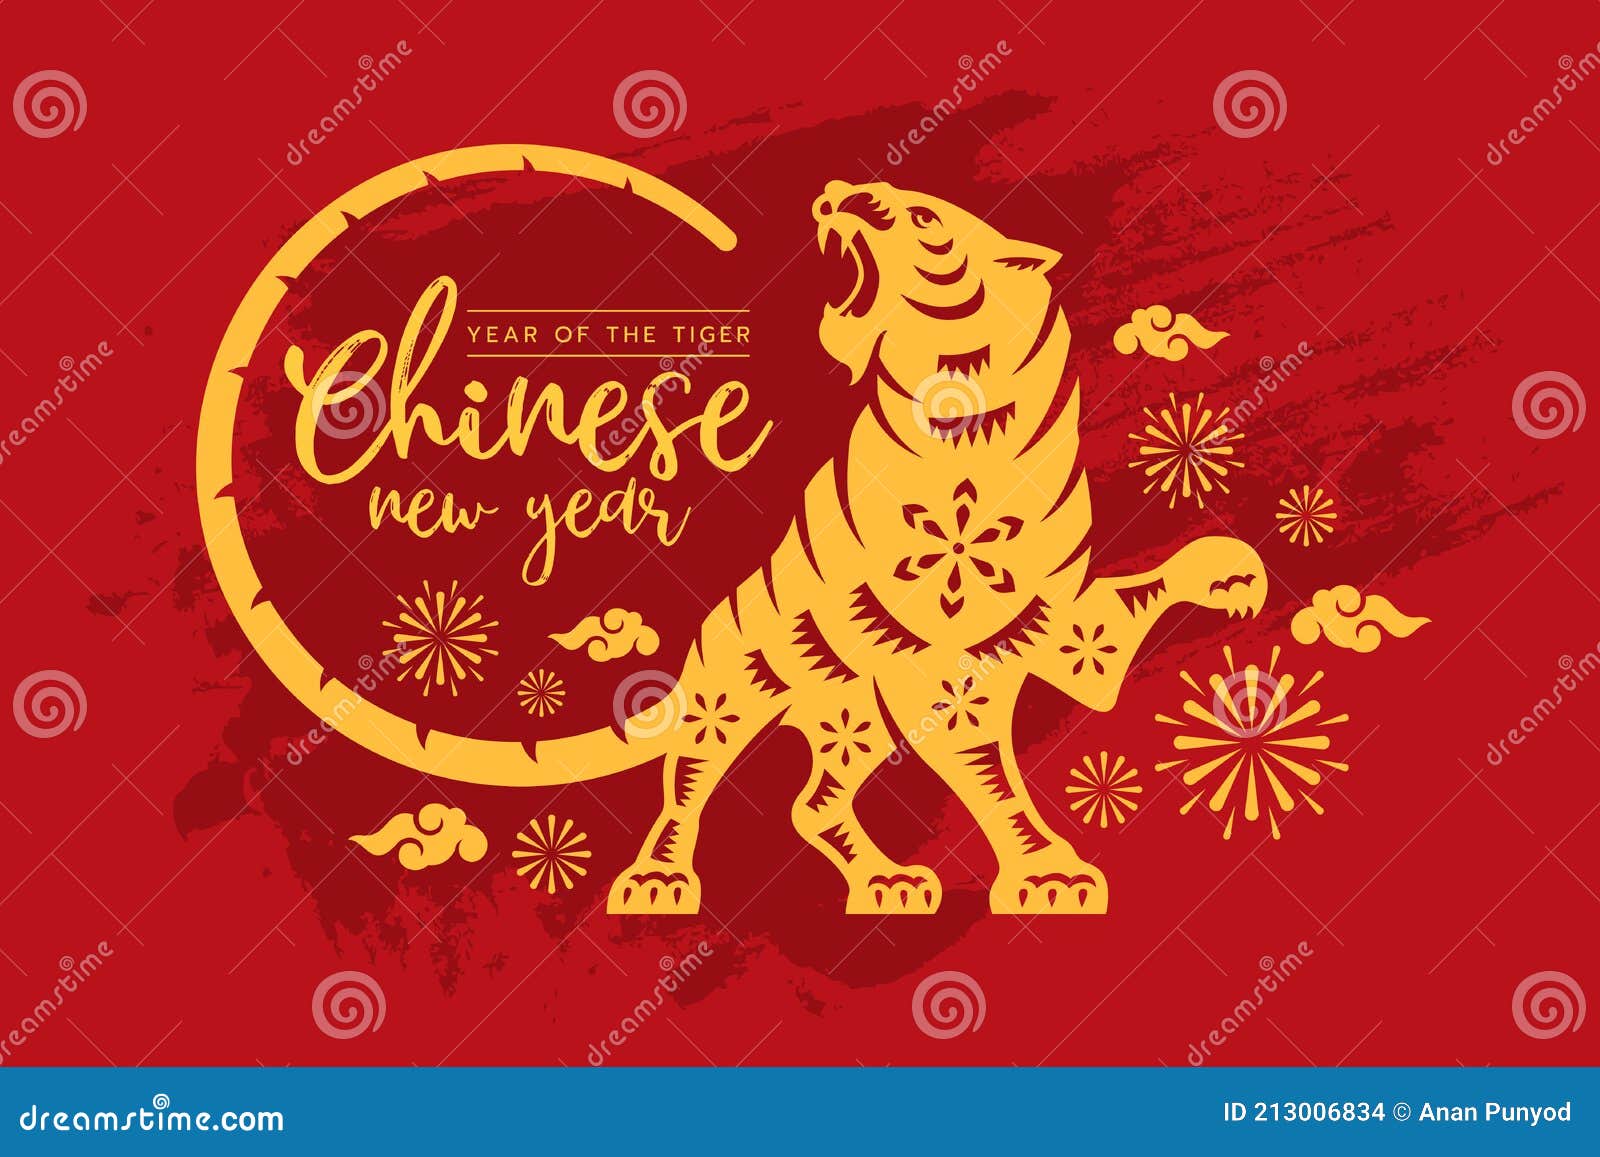 Chinese New Year clipart, lunar new year clipart, kawaii tiger clipart,  zodiac clipart, kawaii zodiac animals clipart, cute tiger clipart